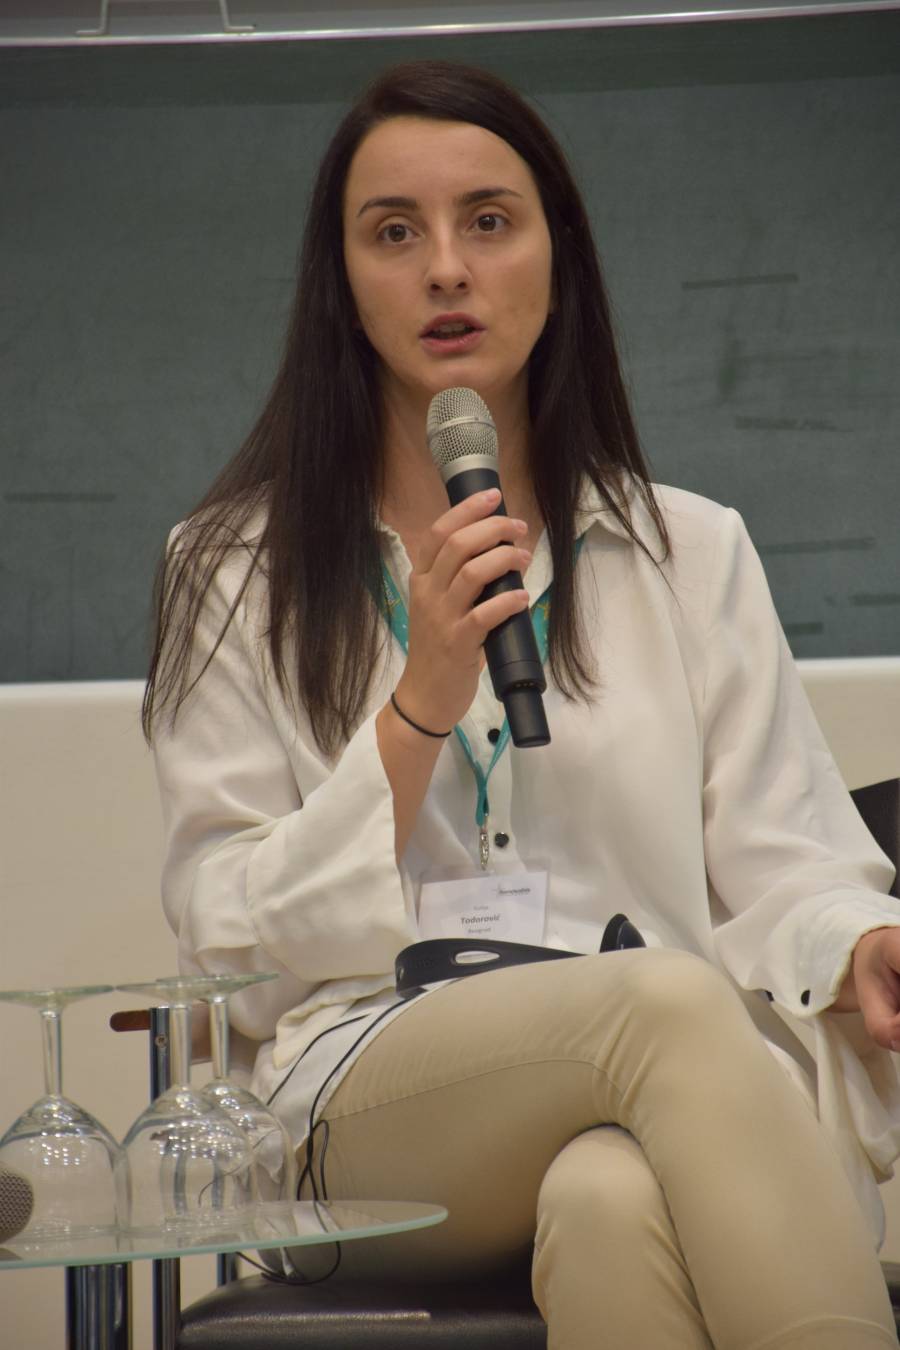 Sofija Todorović holds a bachelor's degree from the Faculty of Law at the University of Belgrade and currently works as a project coordinator for the Belgrade BIRN Hub (Balkan Investigative Regional Reporting Network).<br><small class="stackrow__imagesource">Source: Renovabis </small>